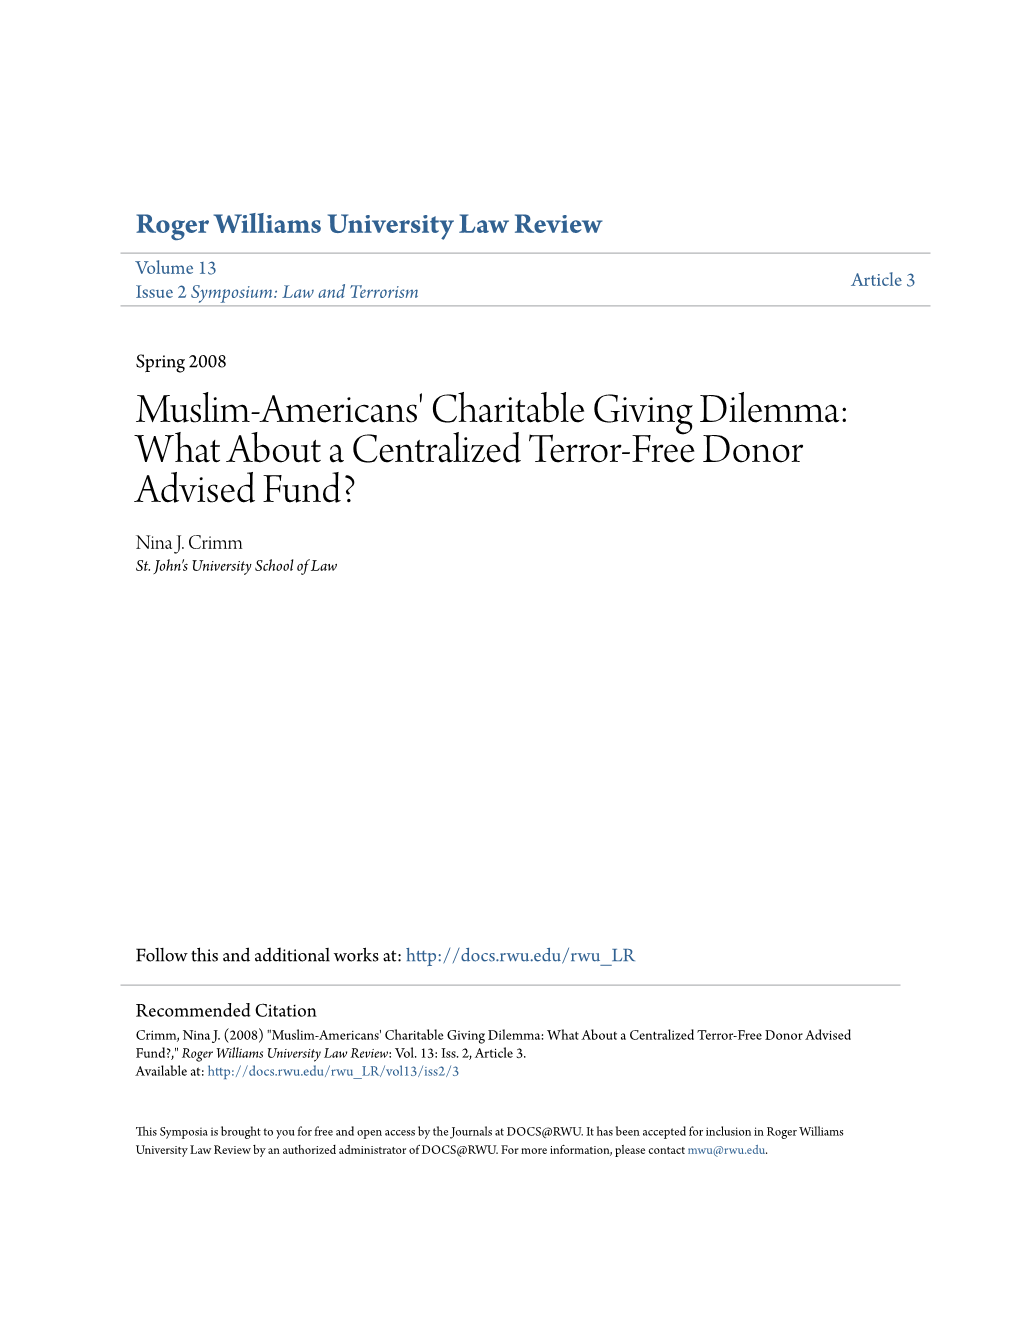 Muslim-Americans' Charitable Giving Dilemma: What About a Centralized Terror-Free Donor Advised Fund? Nina J